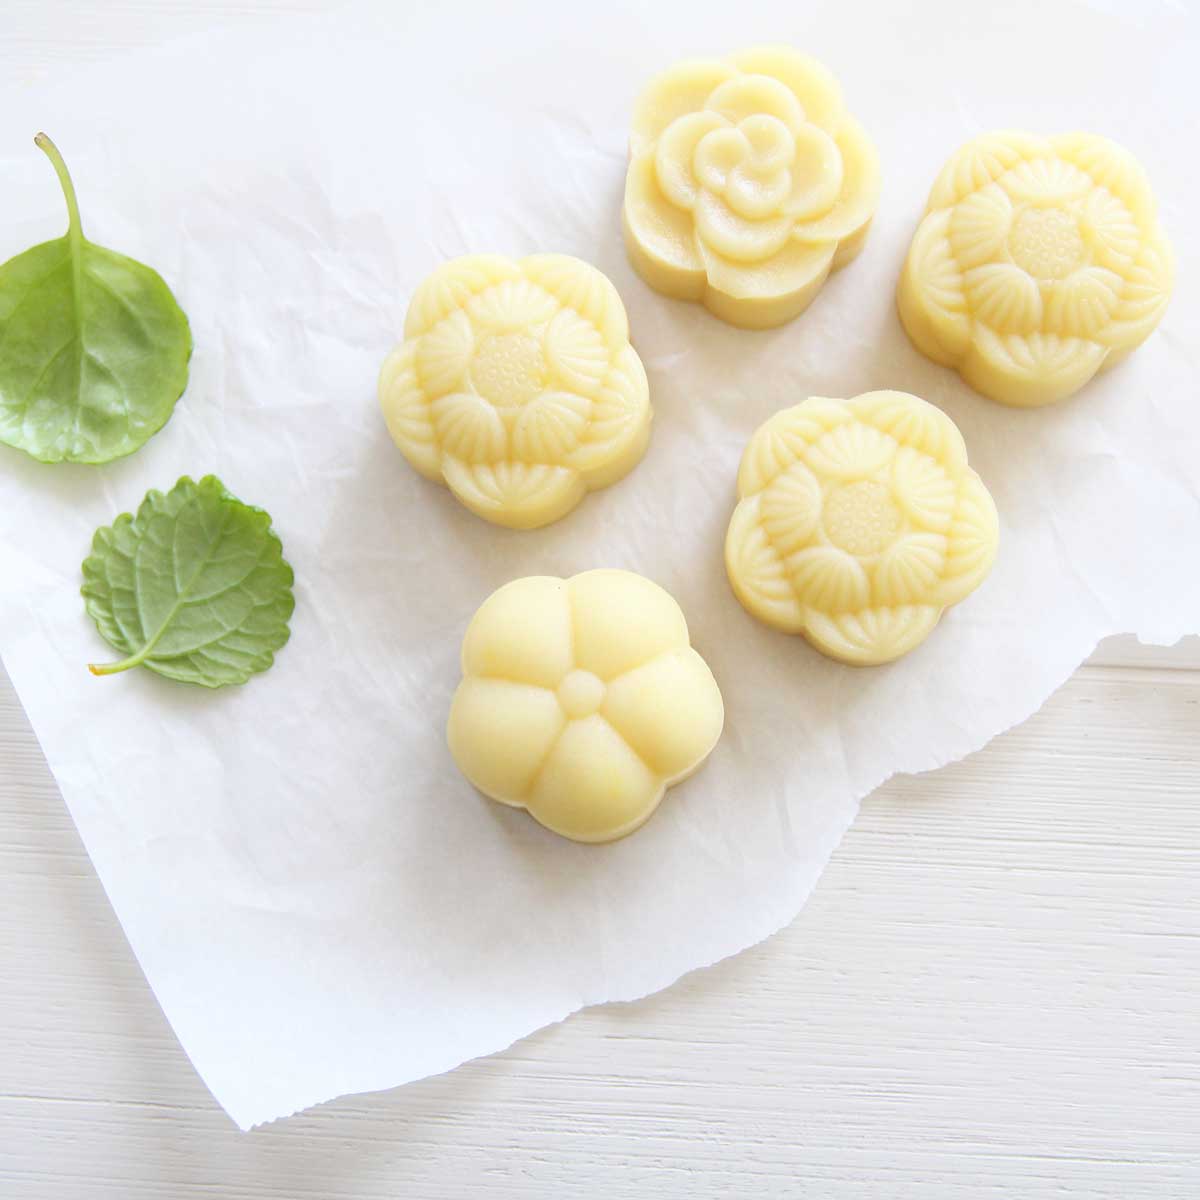 Homemade Durian Snow Skin Mooncakes with Mung Bean Filling - Walnut Butter Mooncakes